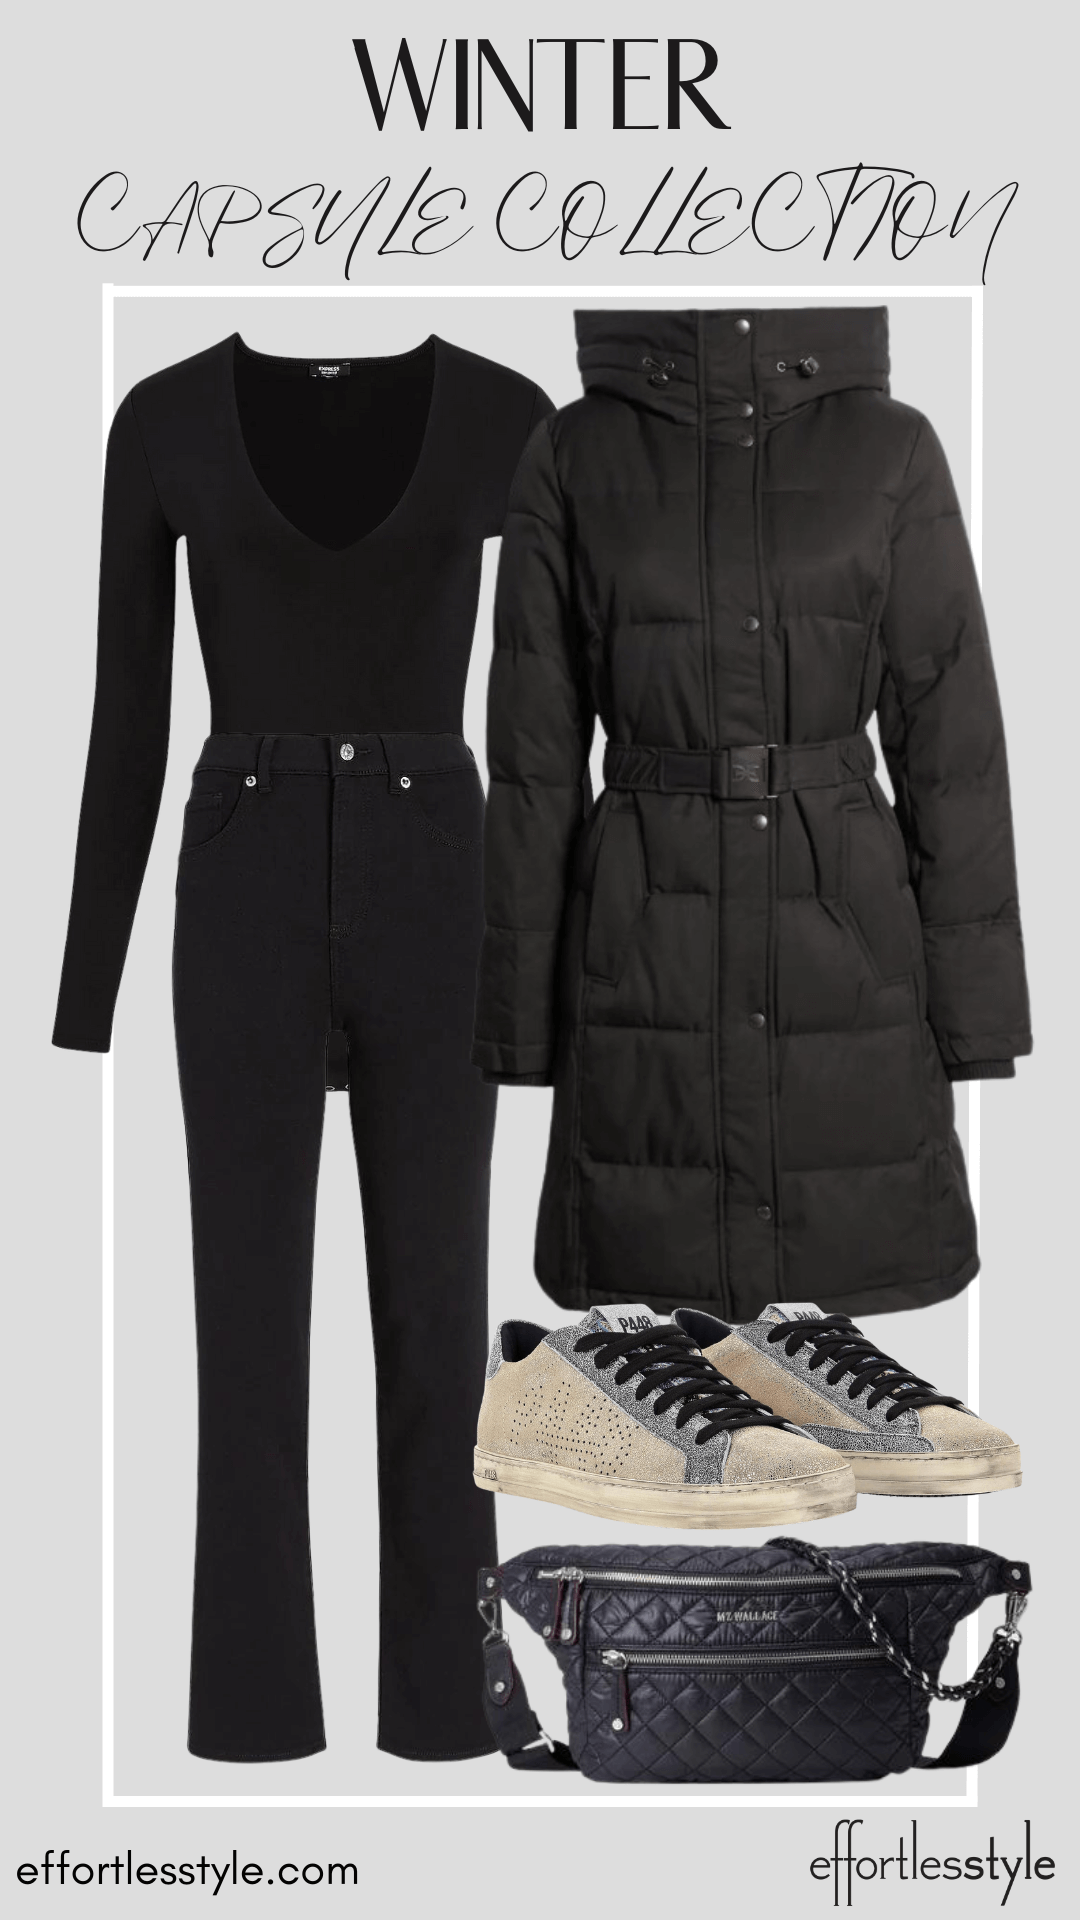 How To Wear Our Winter Capsule Wardrobe - Part 1 Puffer Coat & Black Bodysuit & Black Jeans how to wear all black how to wear sneakers with black jeans how to wear sneakers with a bodysuit how to style a bodysuit how to wear a long sleeve bodysuit